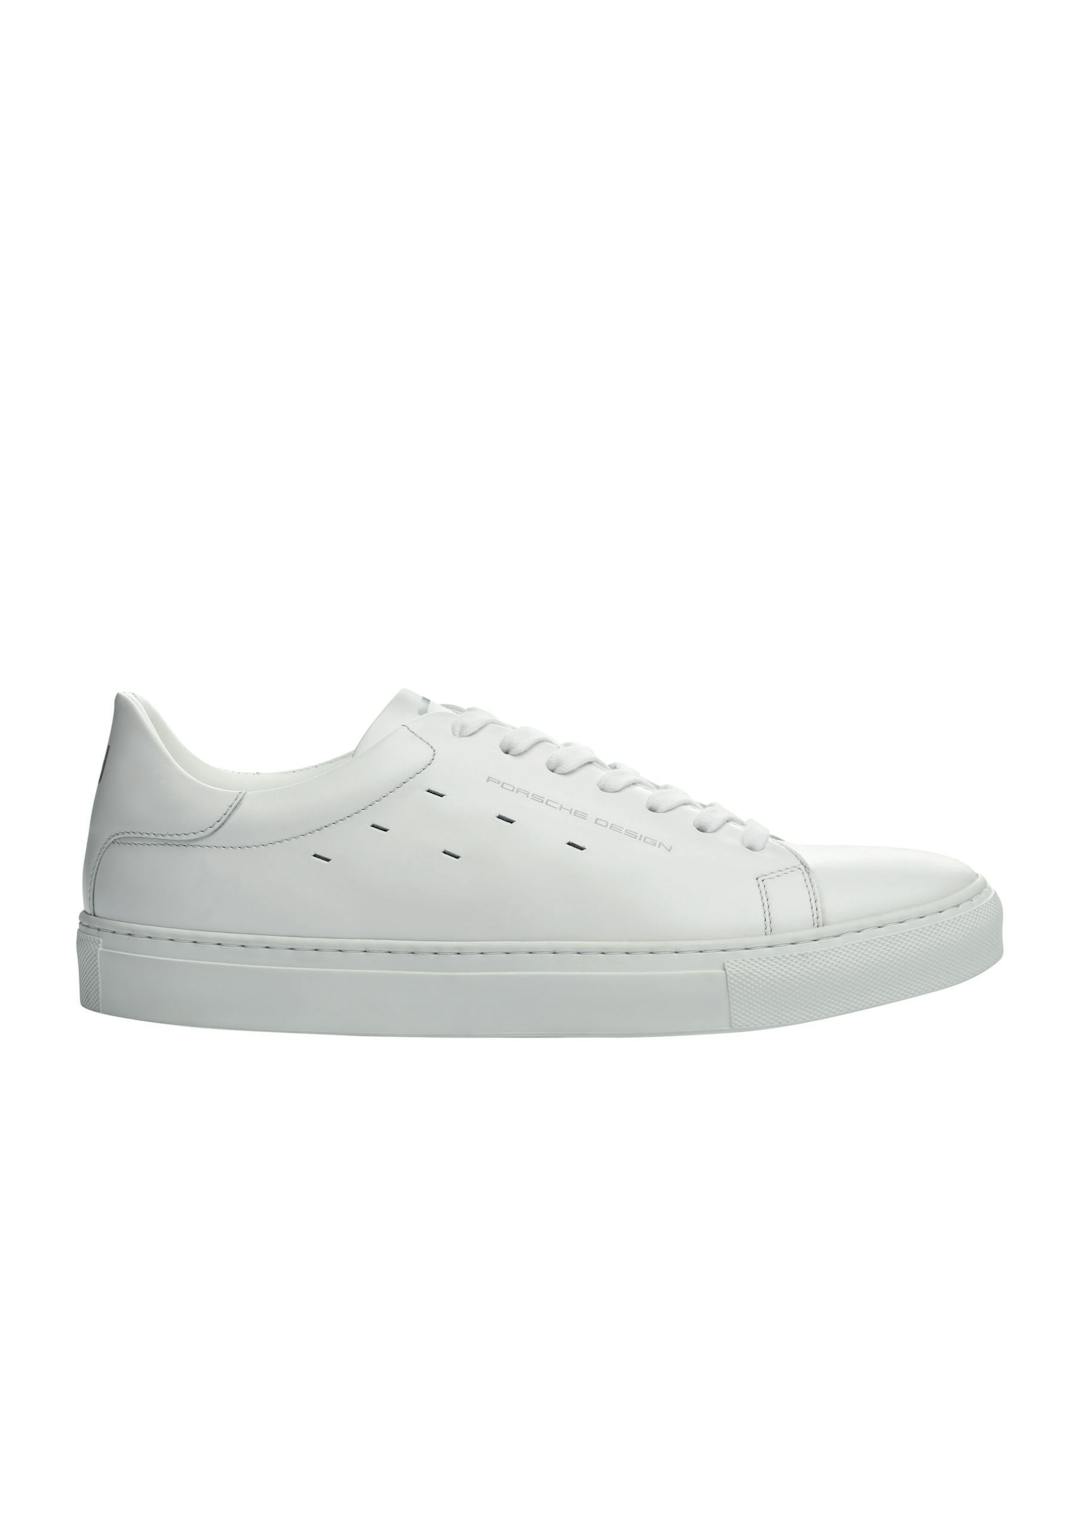 PorscheDesign_Shoes_Cupsole_Sneaker_White